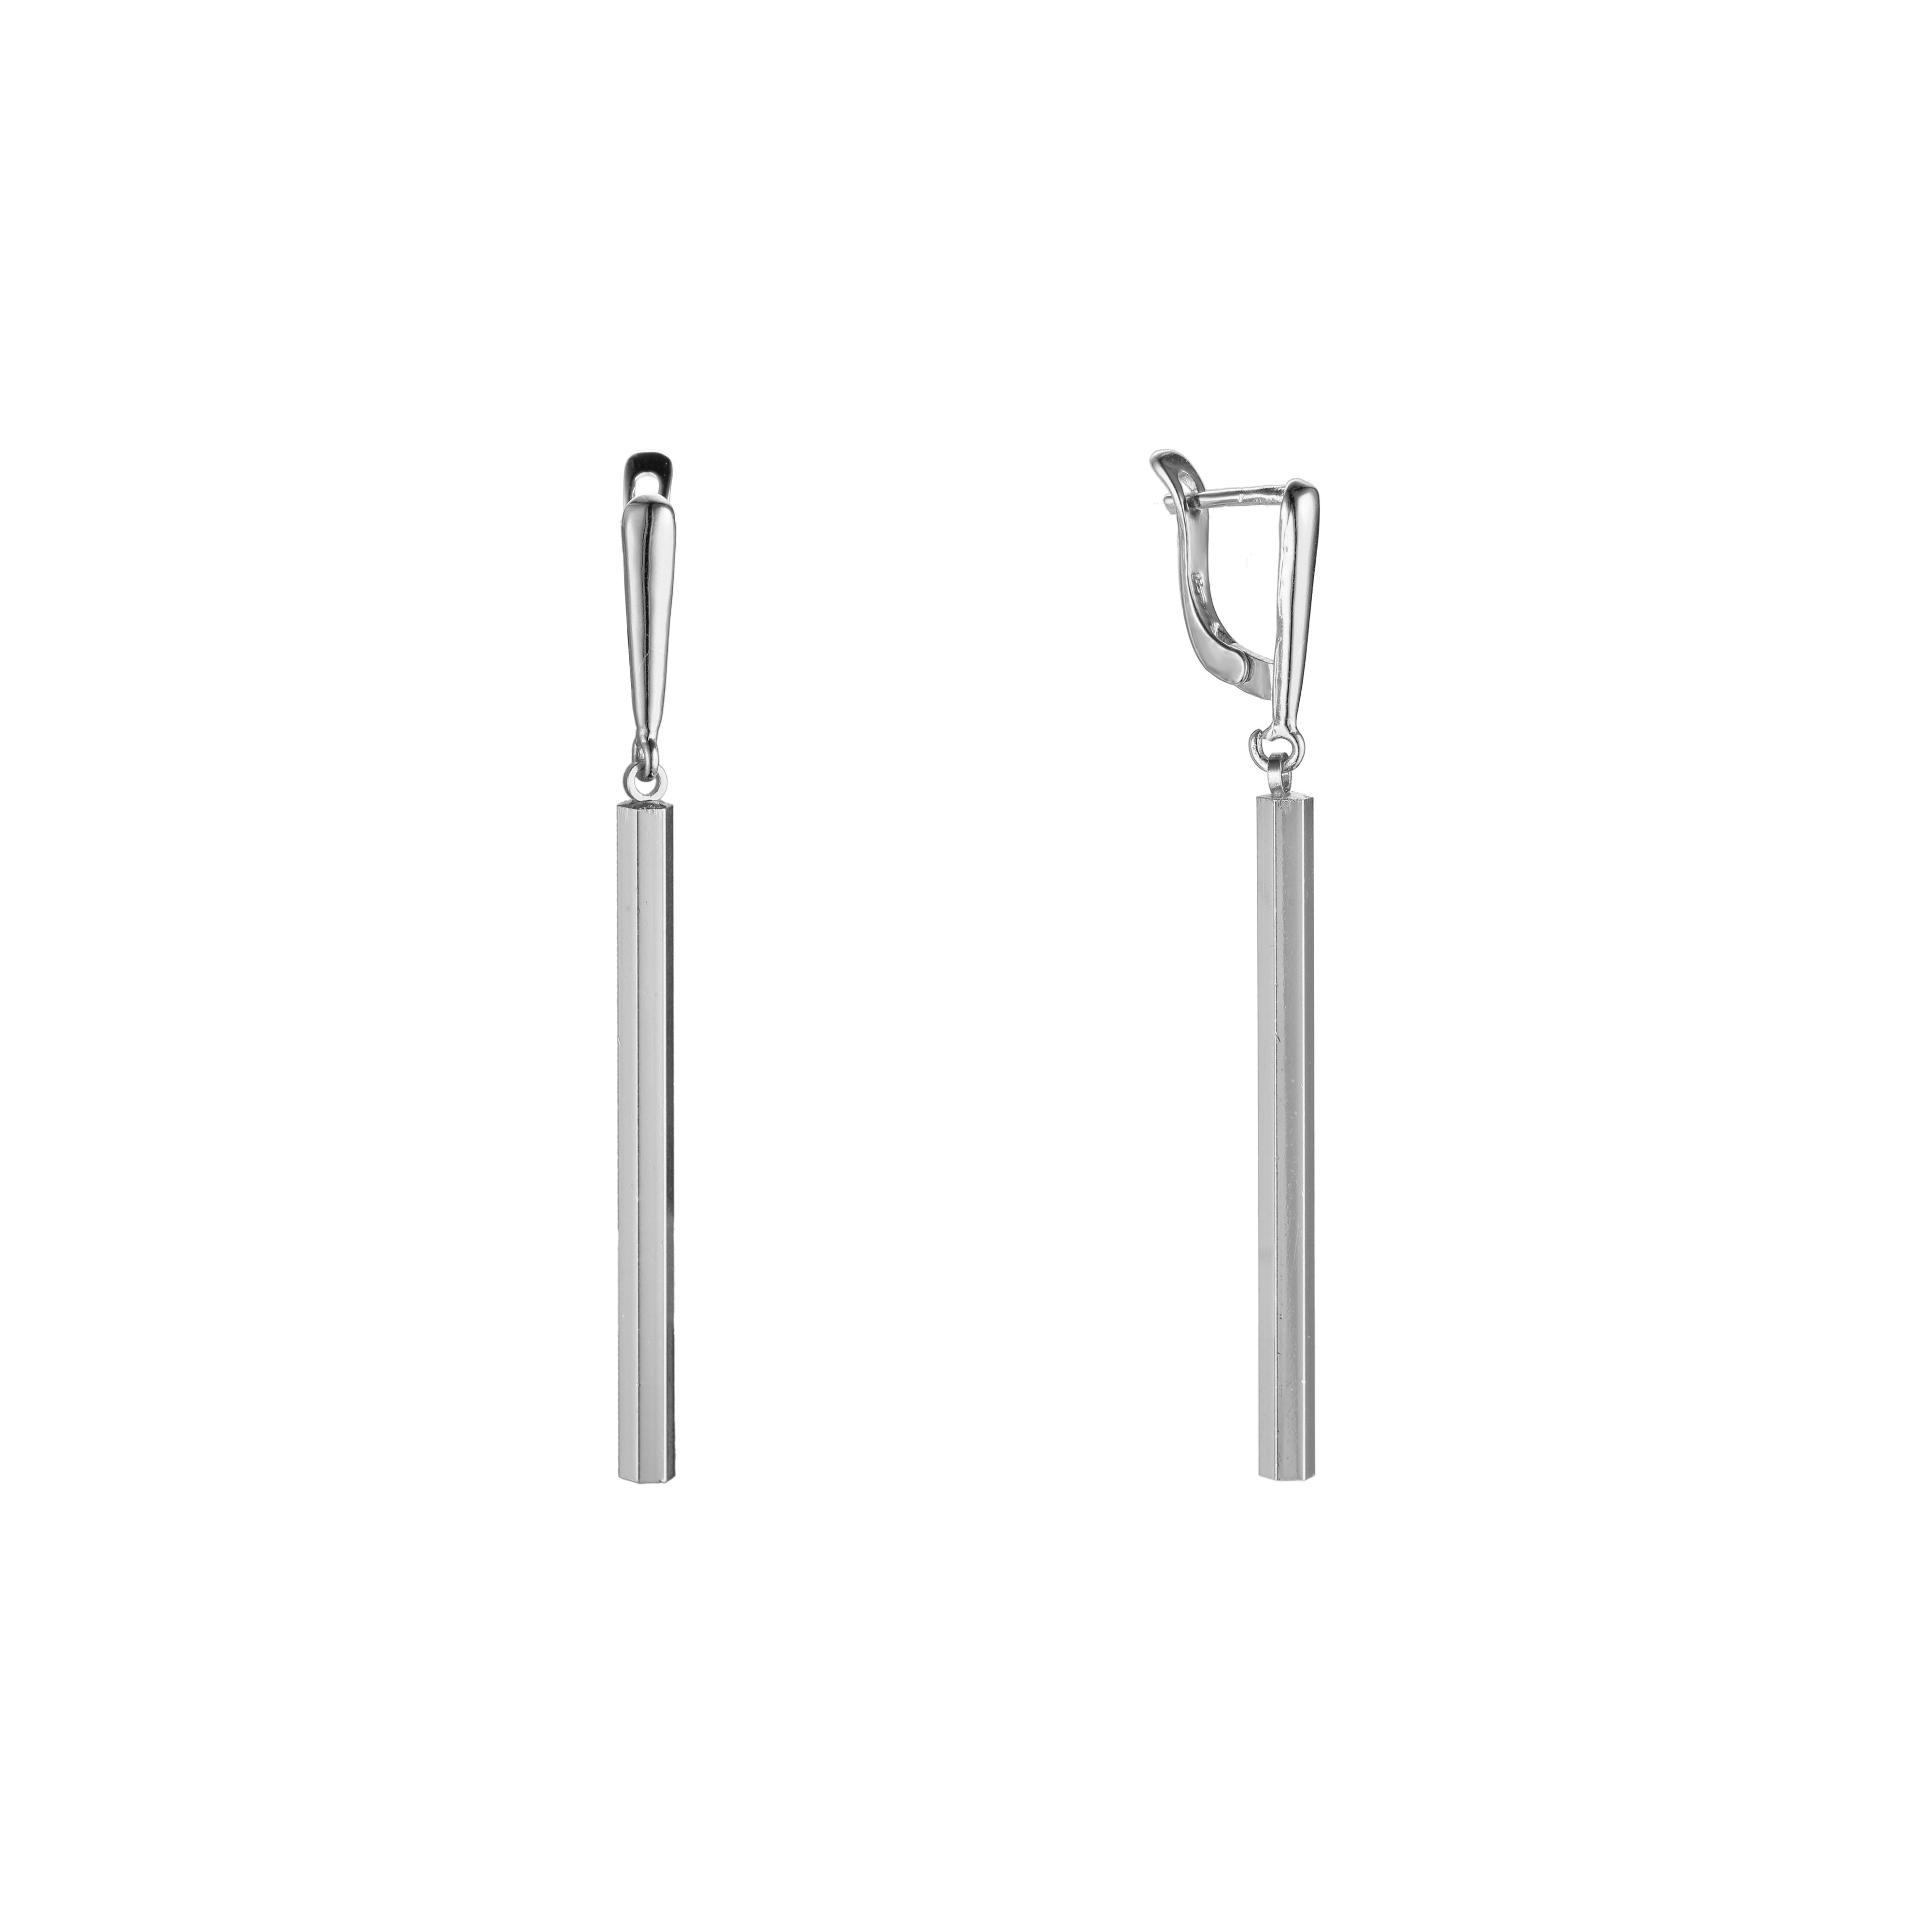 .Long bar drop earrings in 14K Gold, White Gold, Rose Gold plating colors